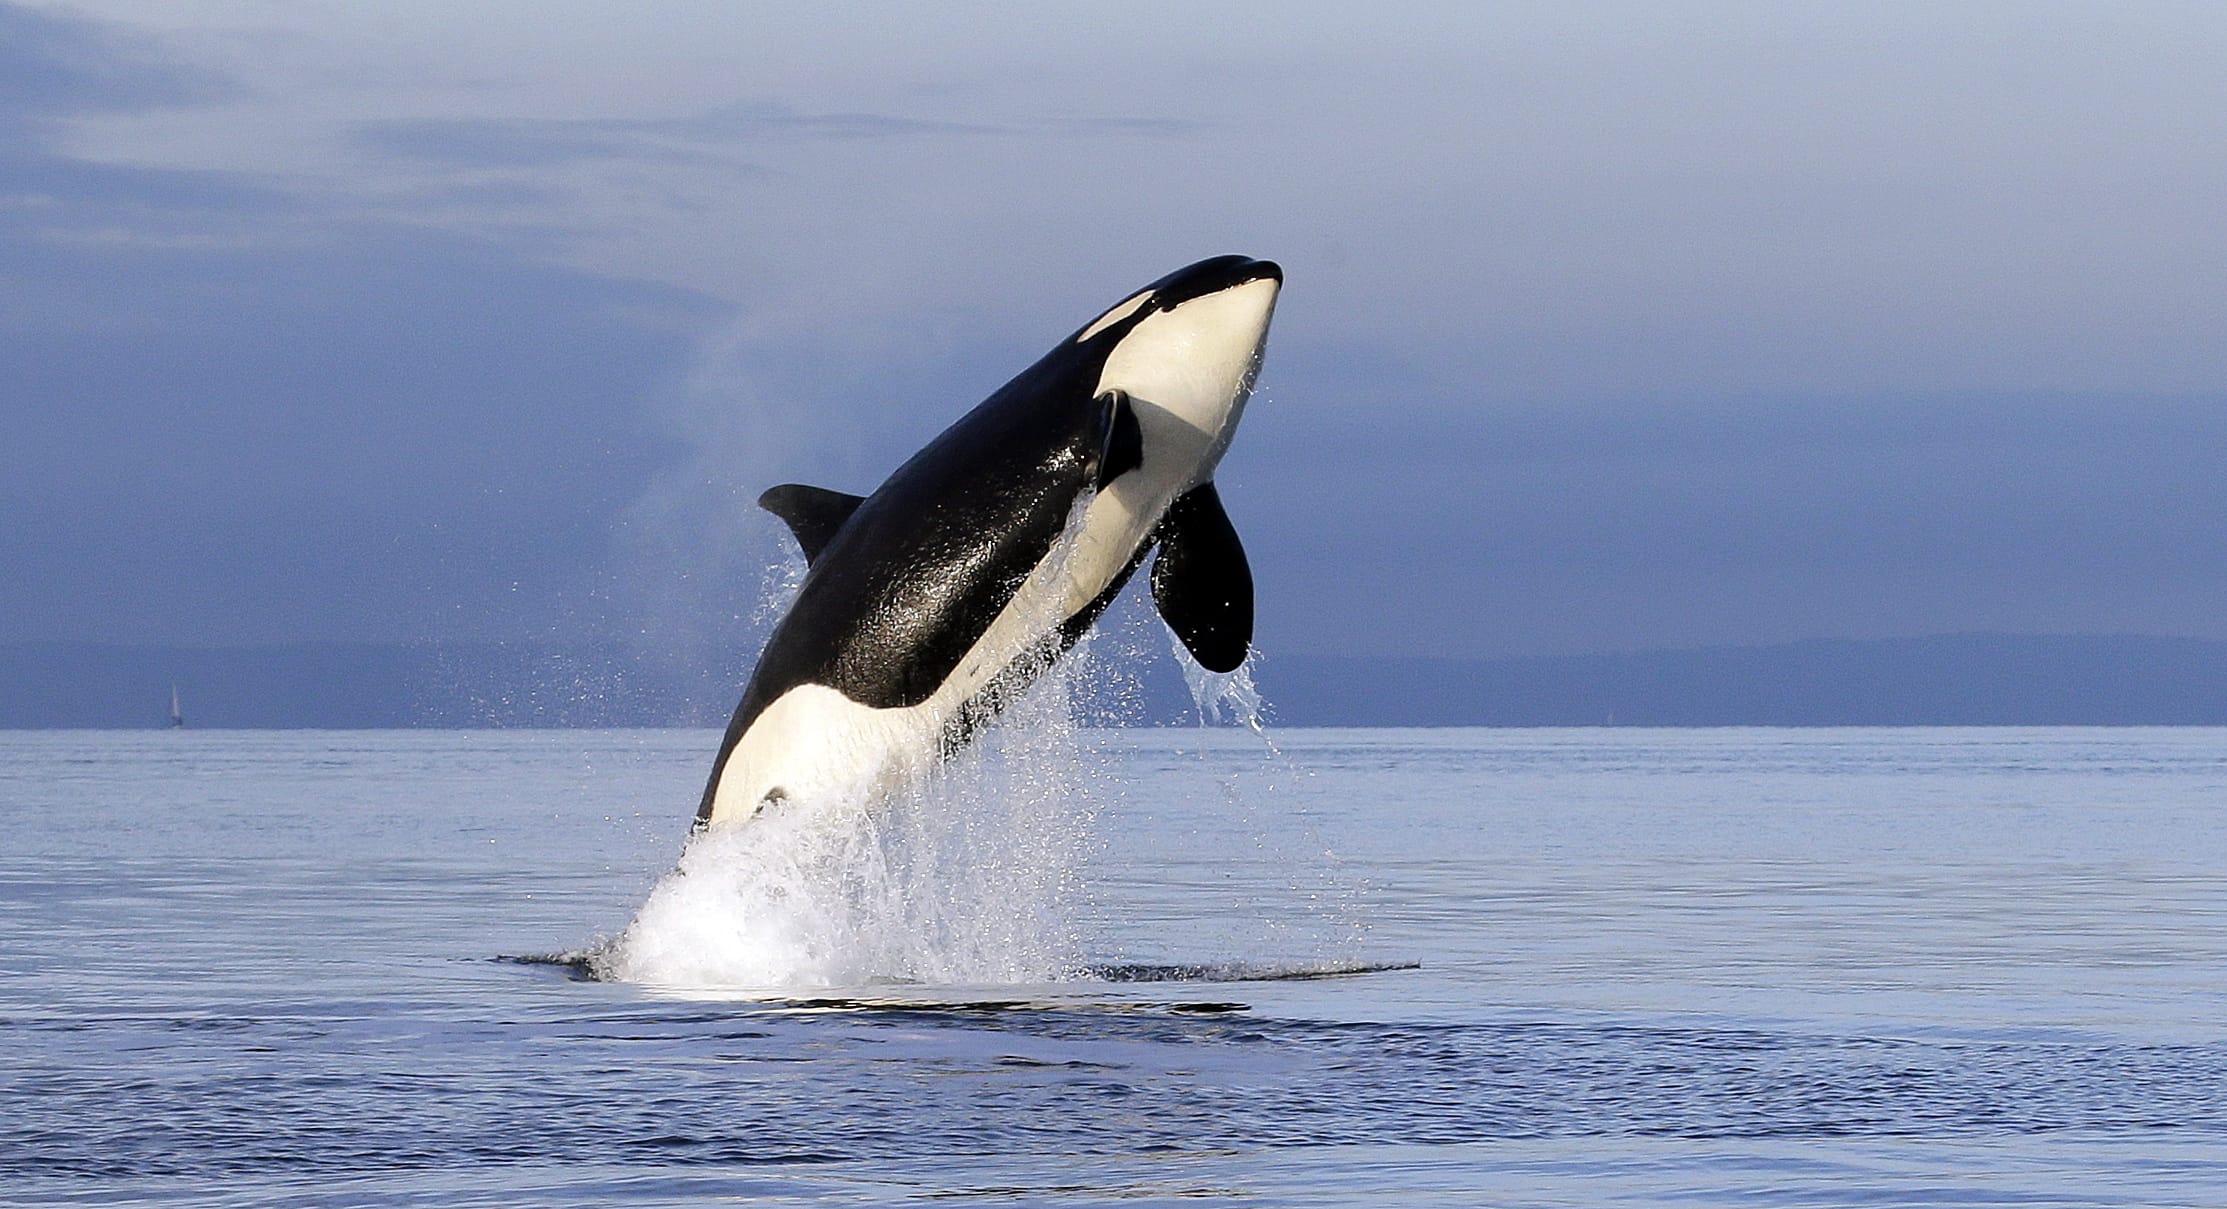 An endangered female orca leaps from the water in 2014 while breaching in Puget Sound west of Seattle.